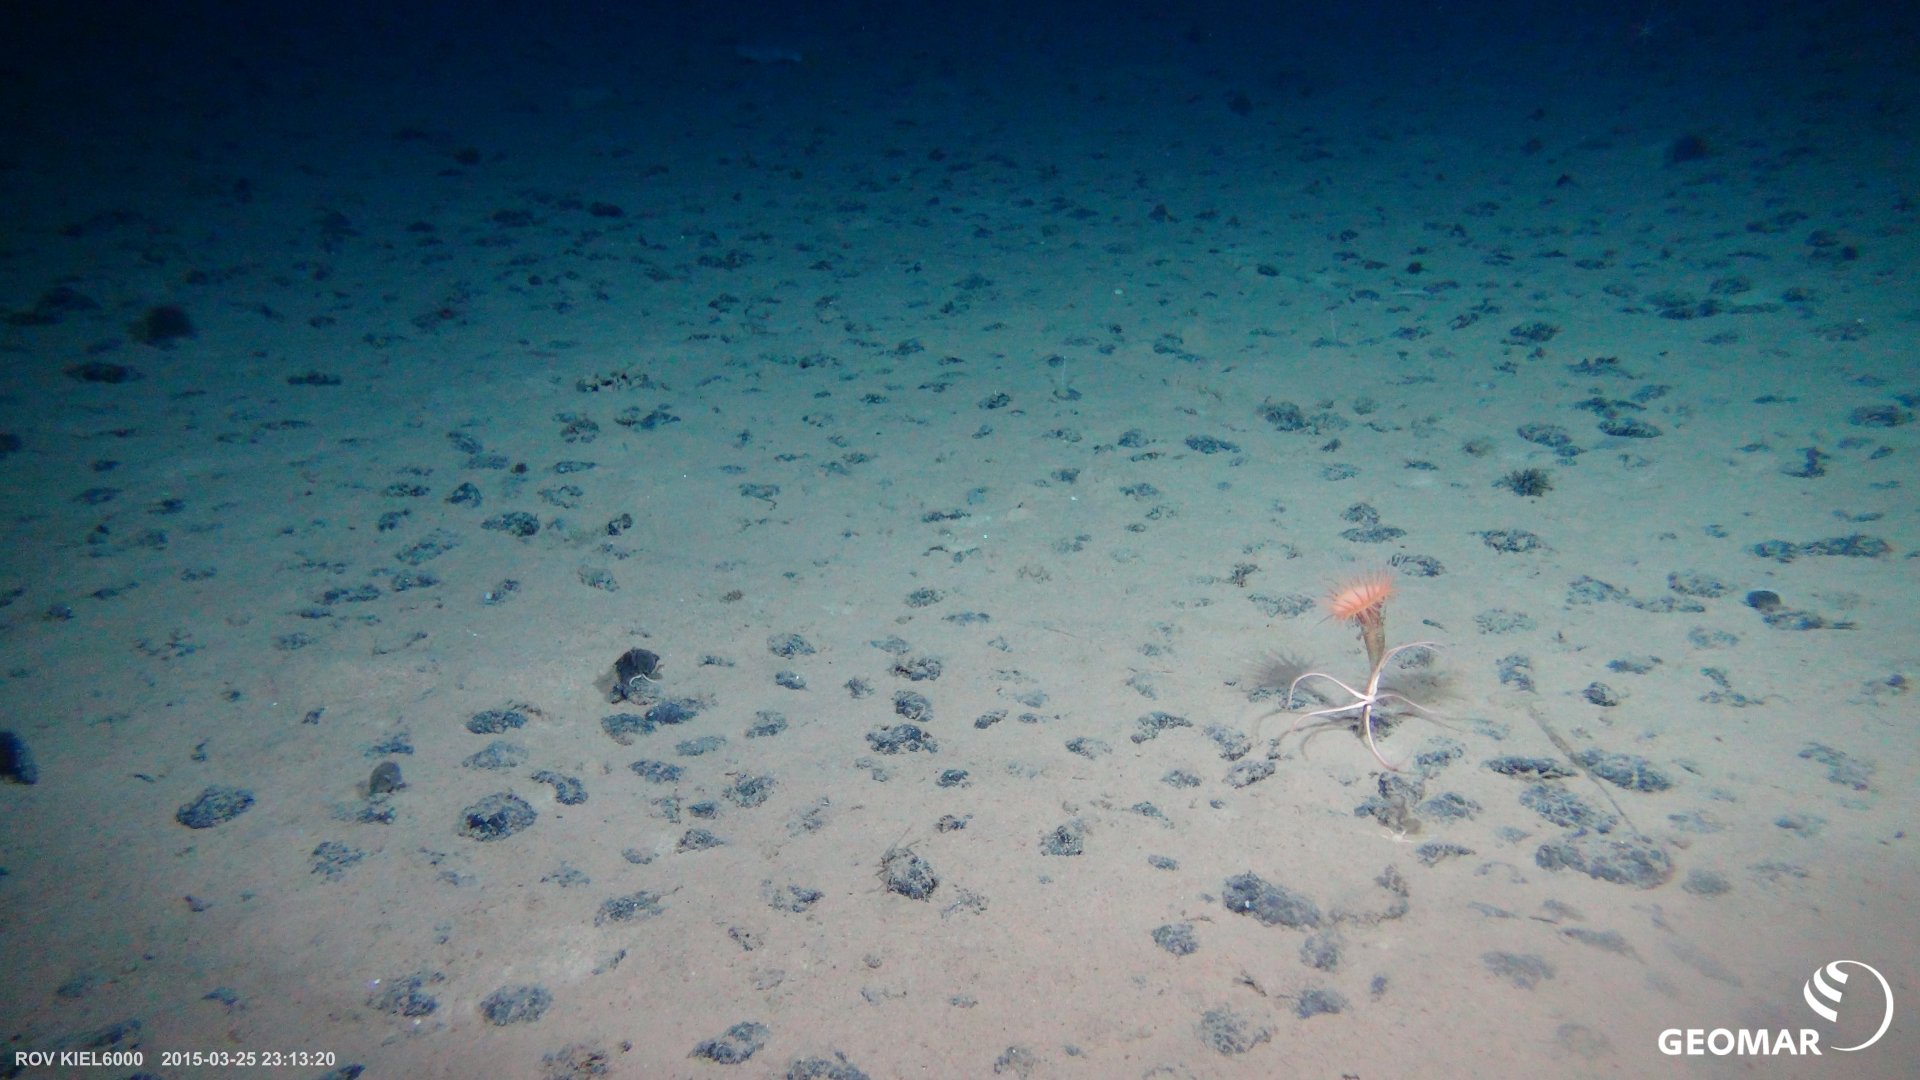 Typical manganese nodule habitat on the seafloor in the Clarion-Clipperton Fracture Zone (CCZ) in the Pacific Ocean (Expedition SO239) with a sea anemone and a brittle star. (Photo: ROV KIEL6000, GEOMAR)